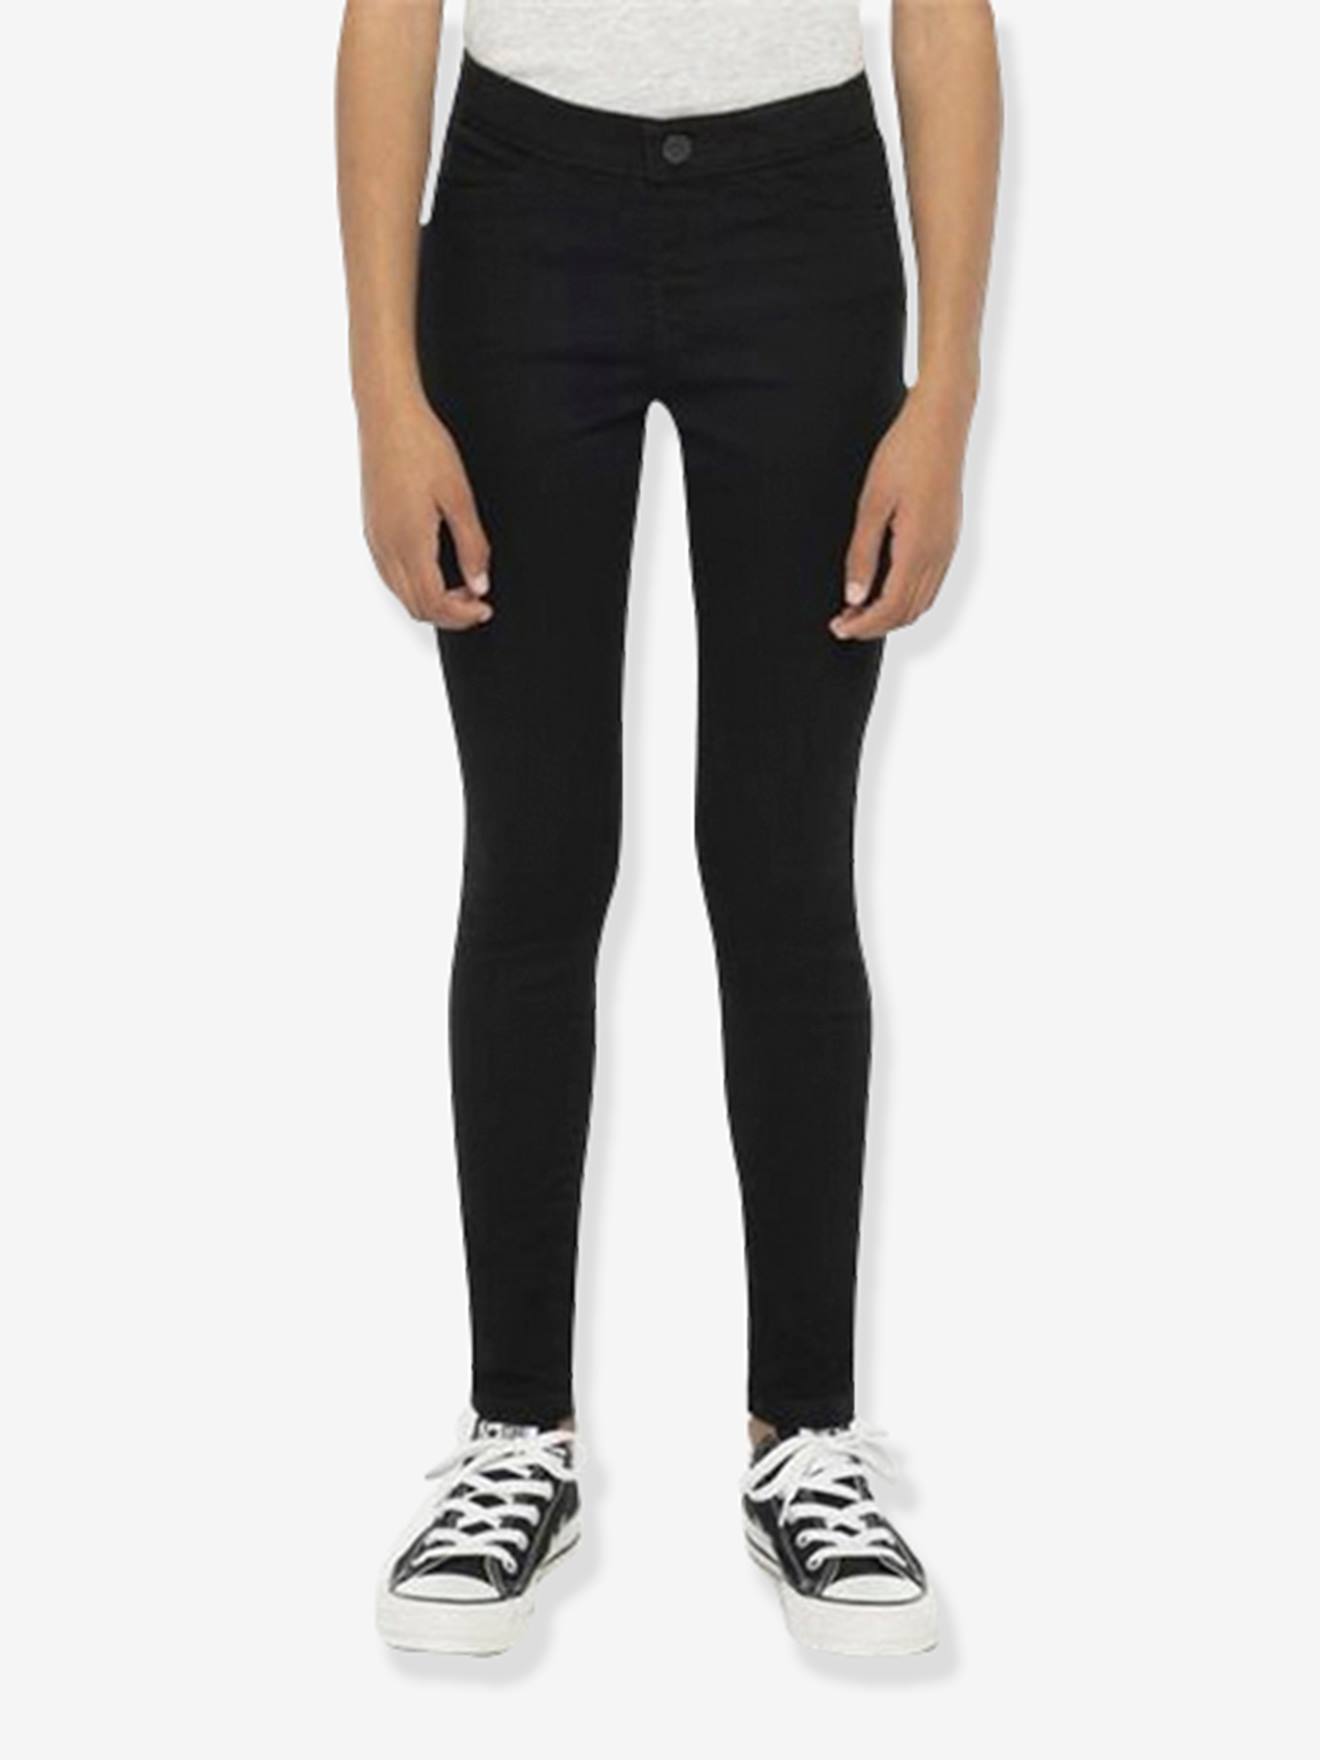 Pull-on Jeggings by Levi’s(r) black